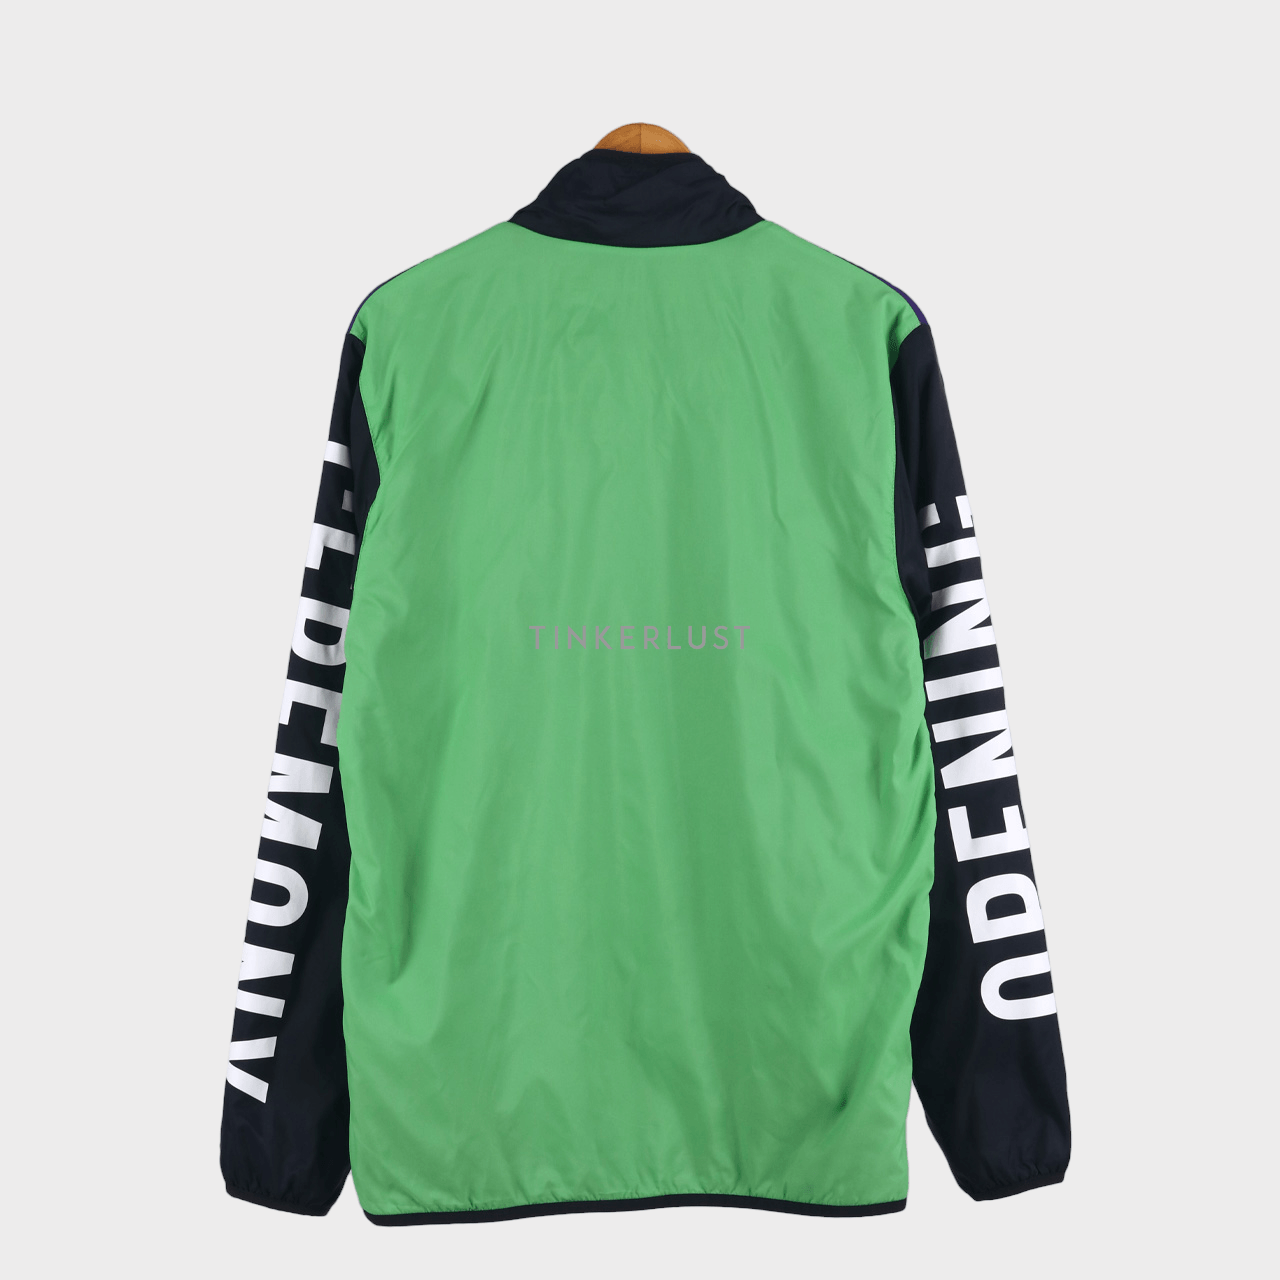 Columbia x Opening Ceremony Multicolor Jacket